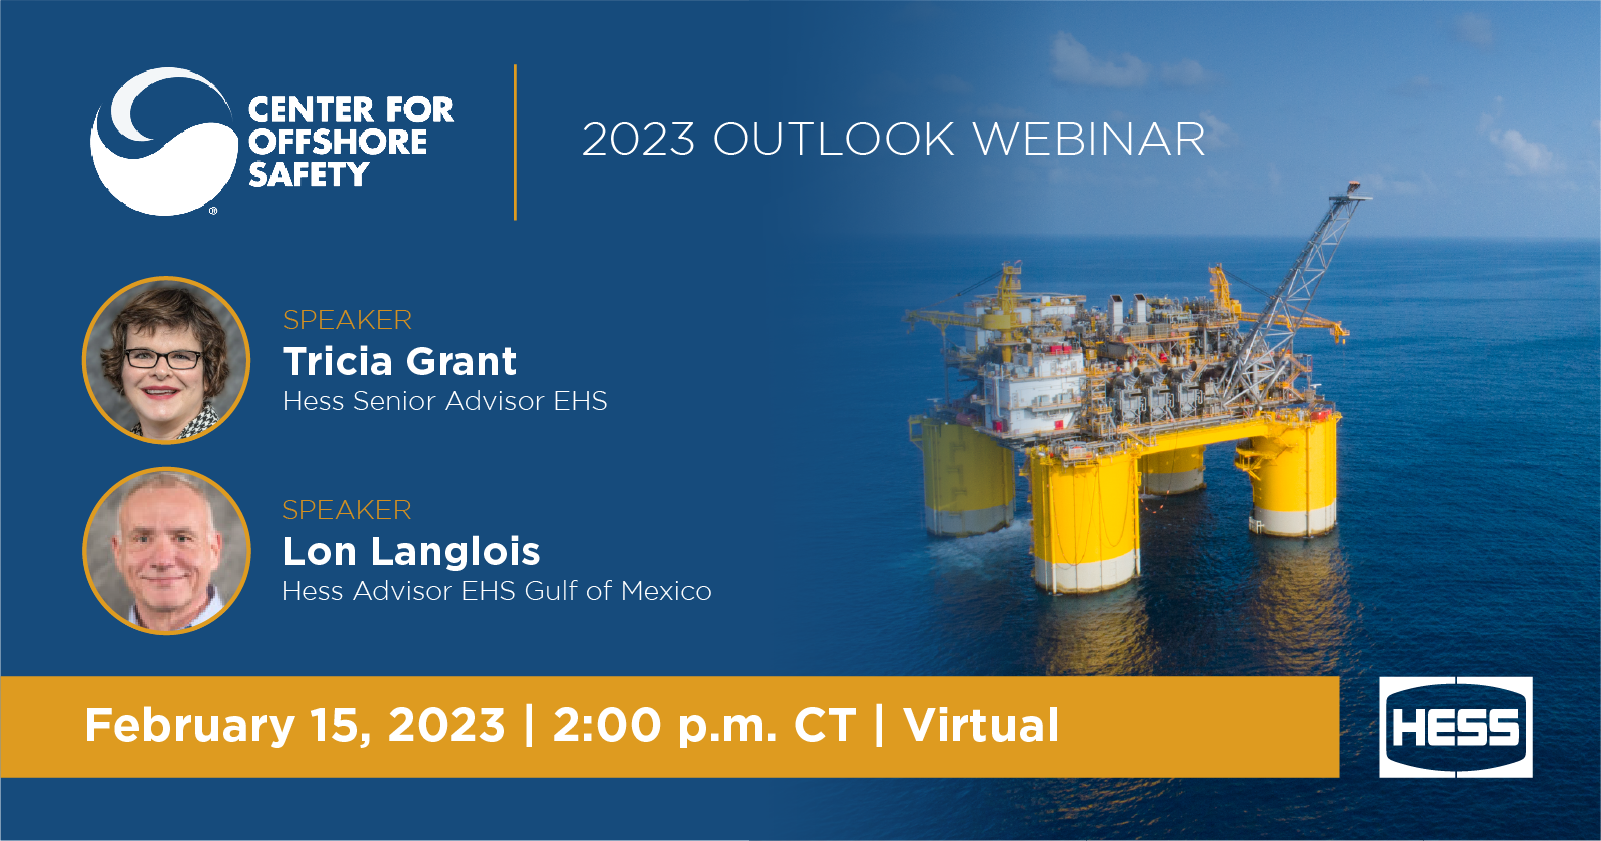 Tricia Grant and Long Langlois Speakers at the Center for Offshore Safety’s Outlook Webinar